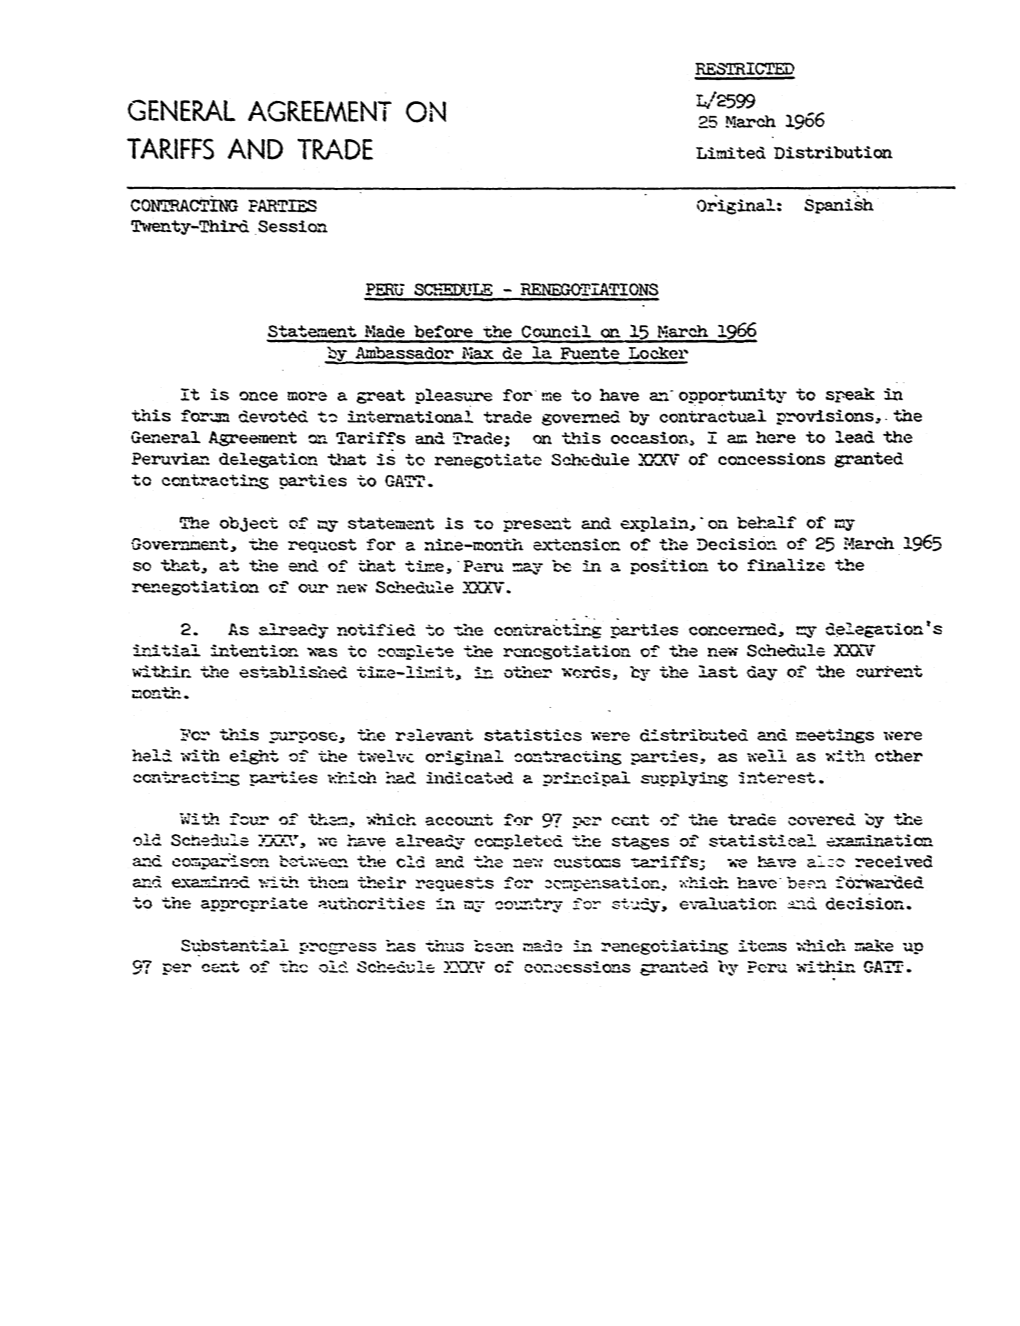 25 March 1966 TARIFFS and TRADE Limited Distribution